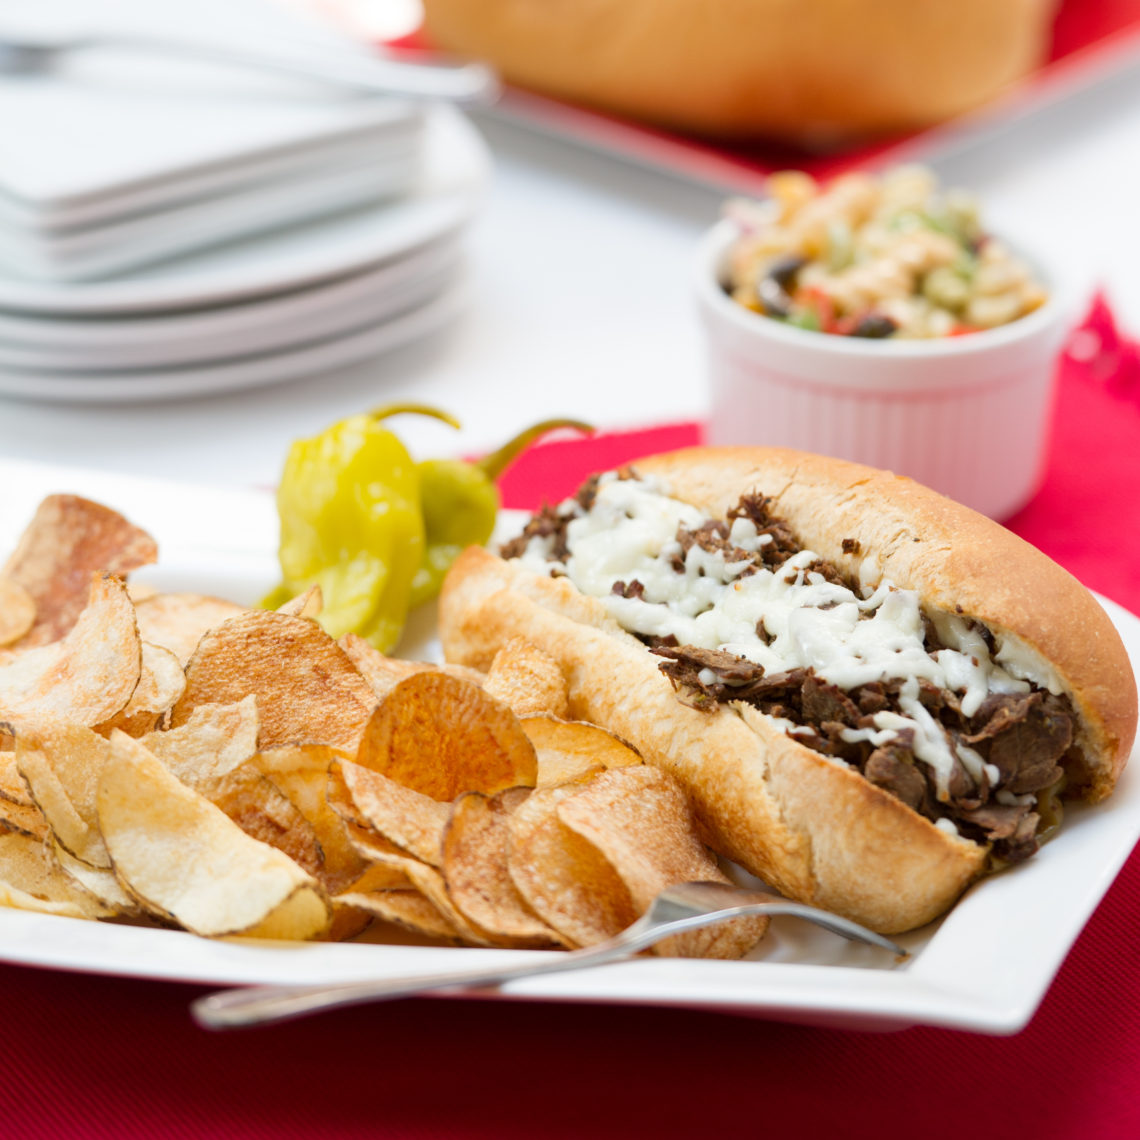 Italian Beef Sandwich with Chips